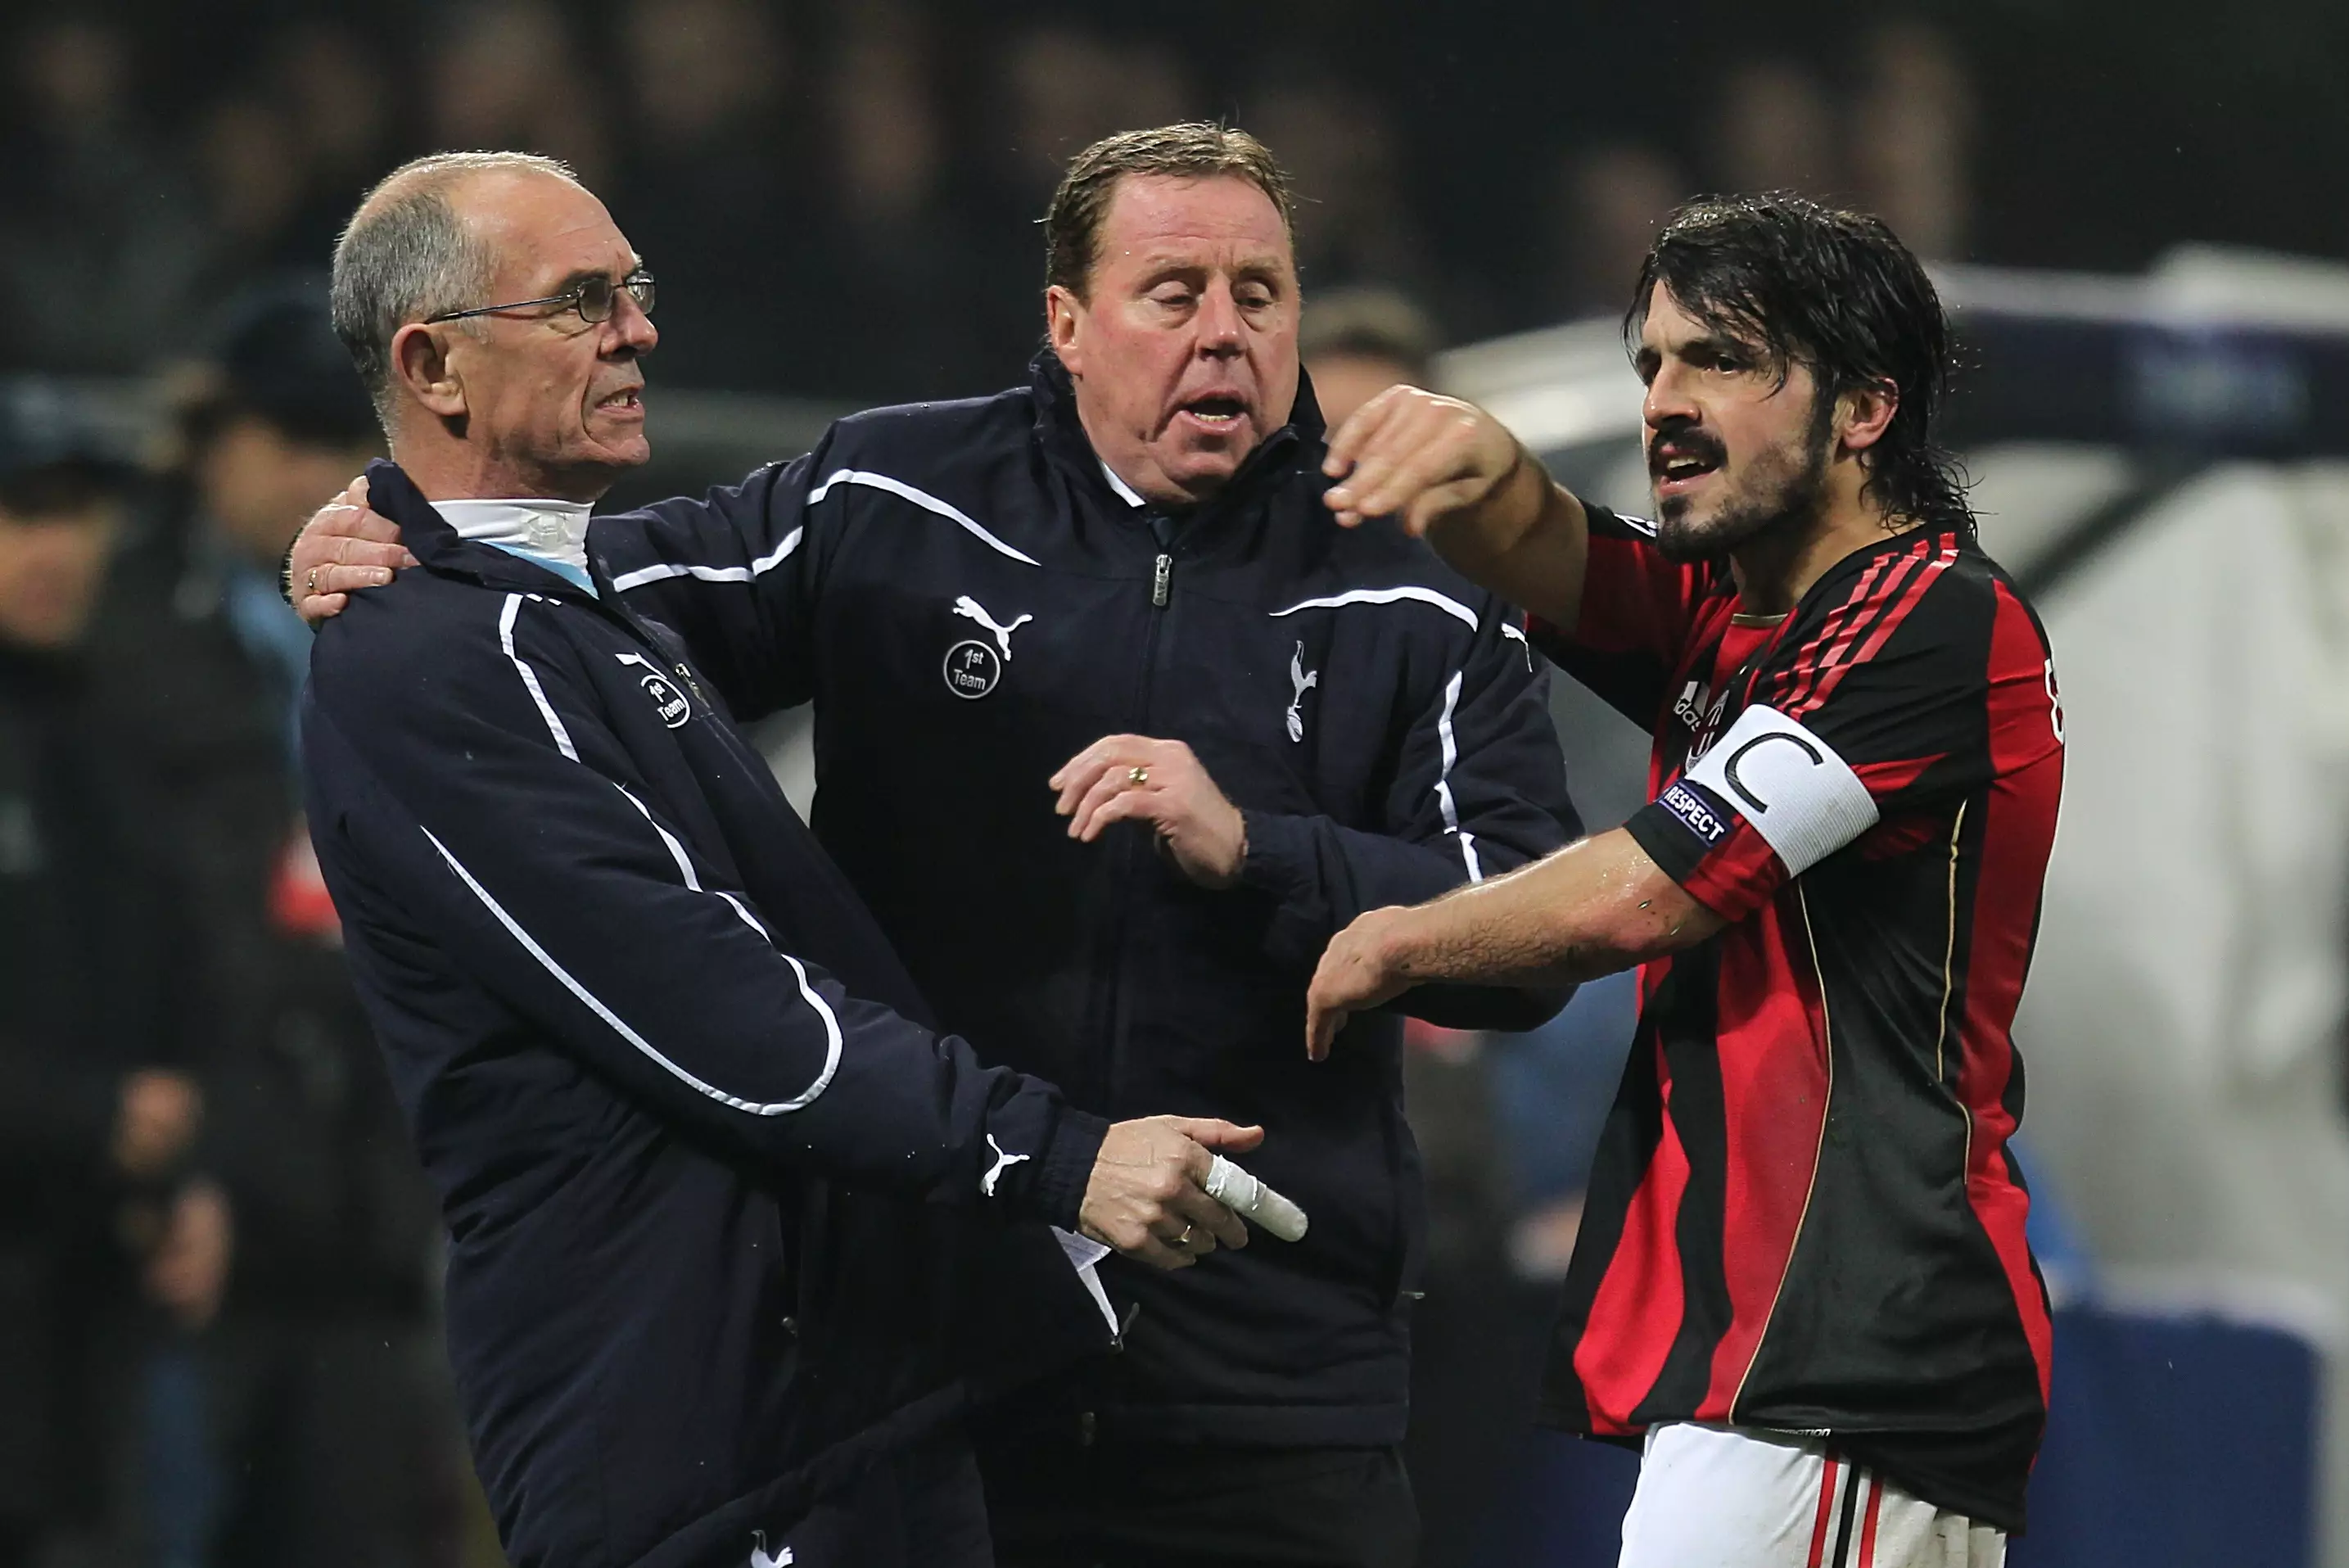 Harry Redknapp pulls Jordan out of the reach of Gattuso. Image: PA